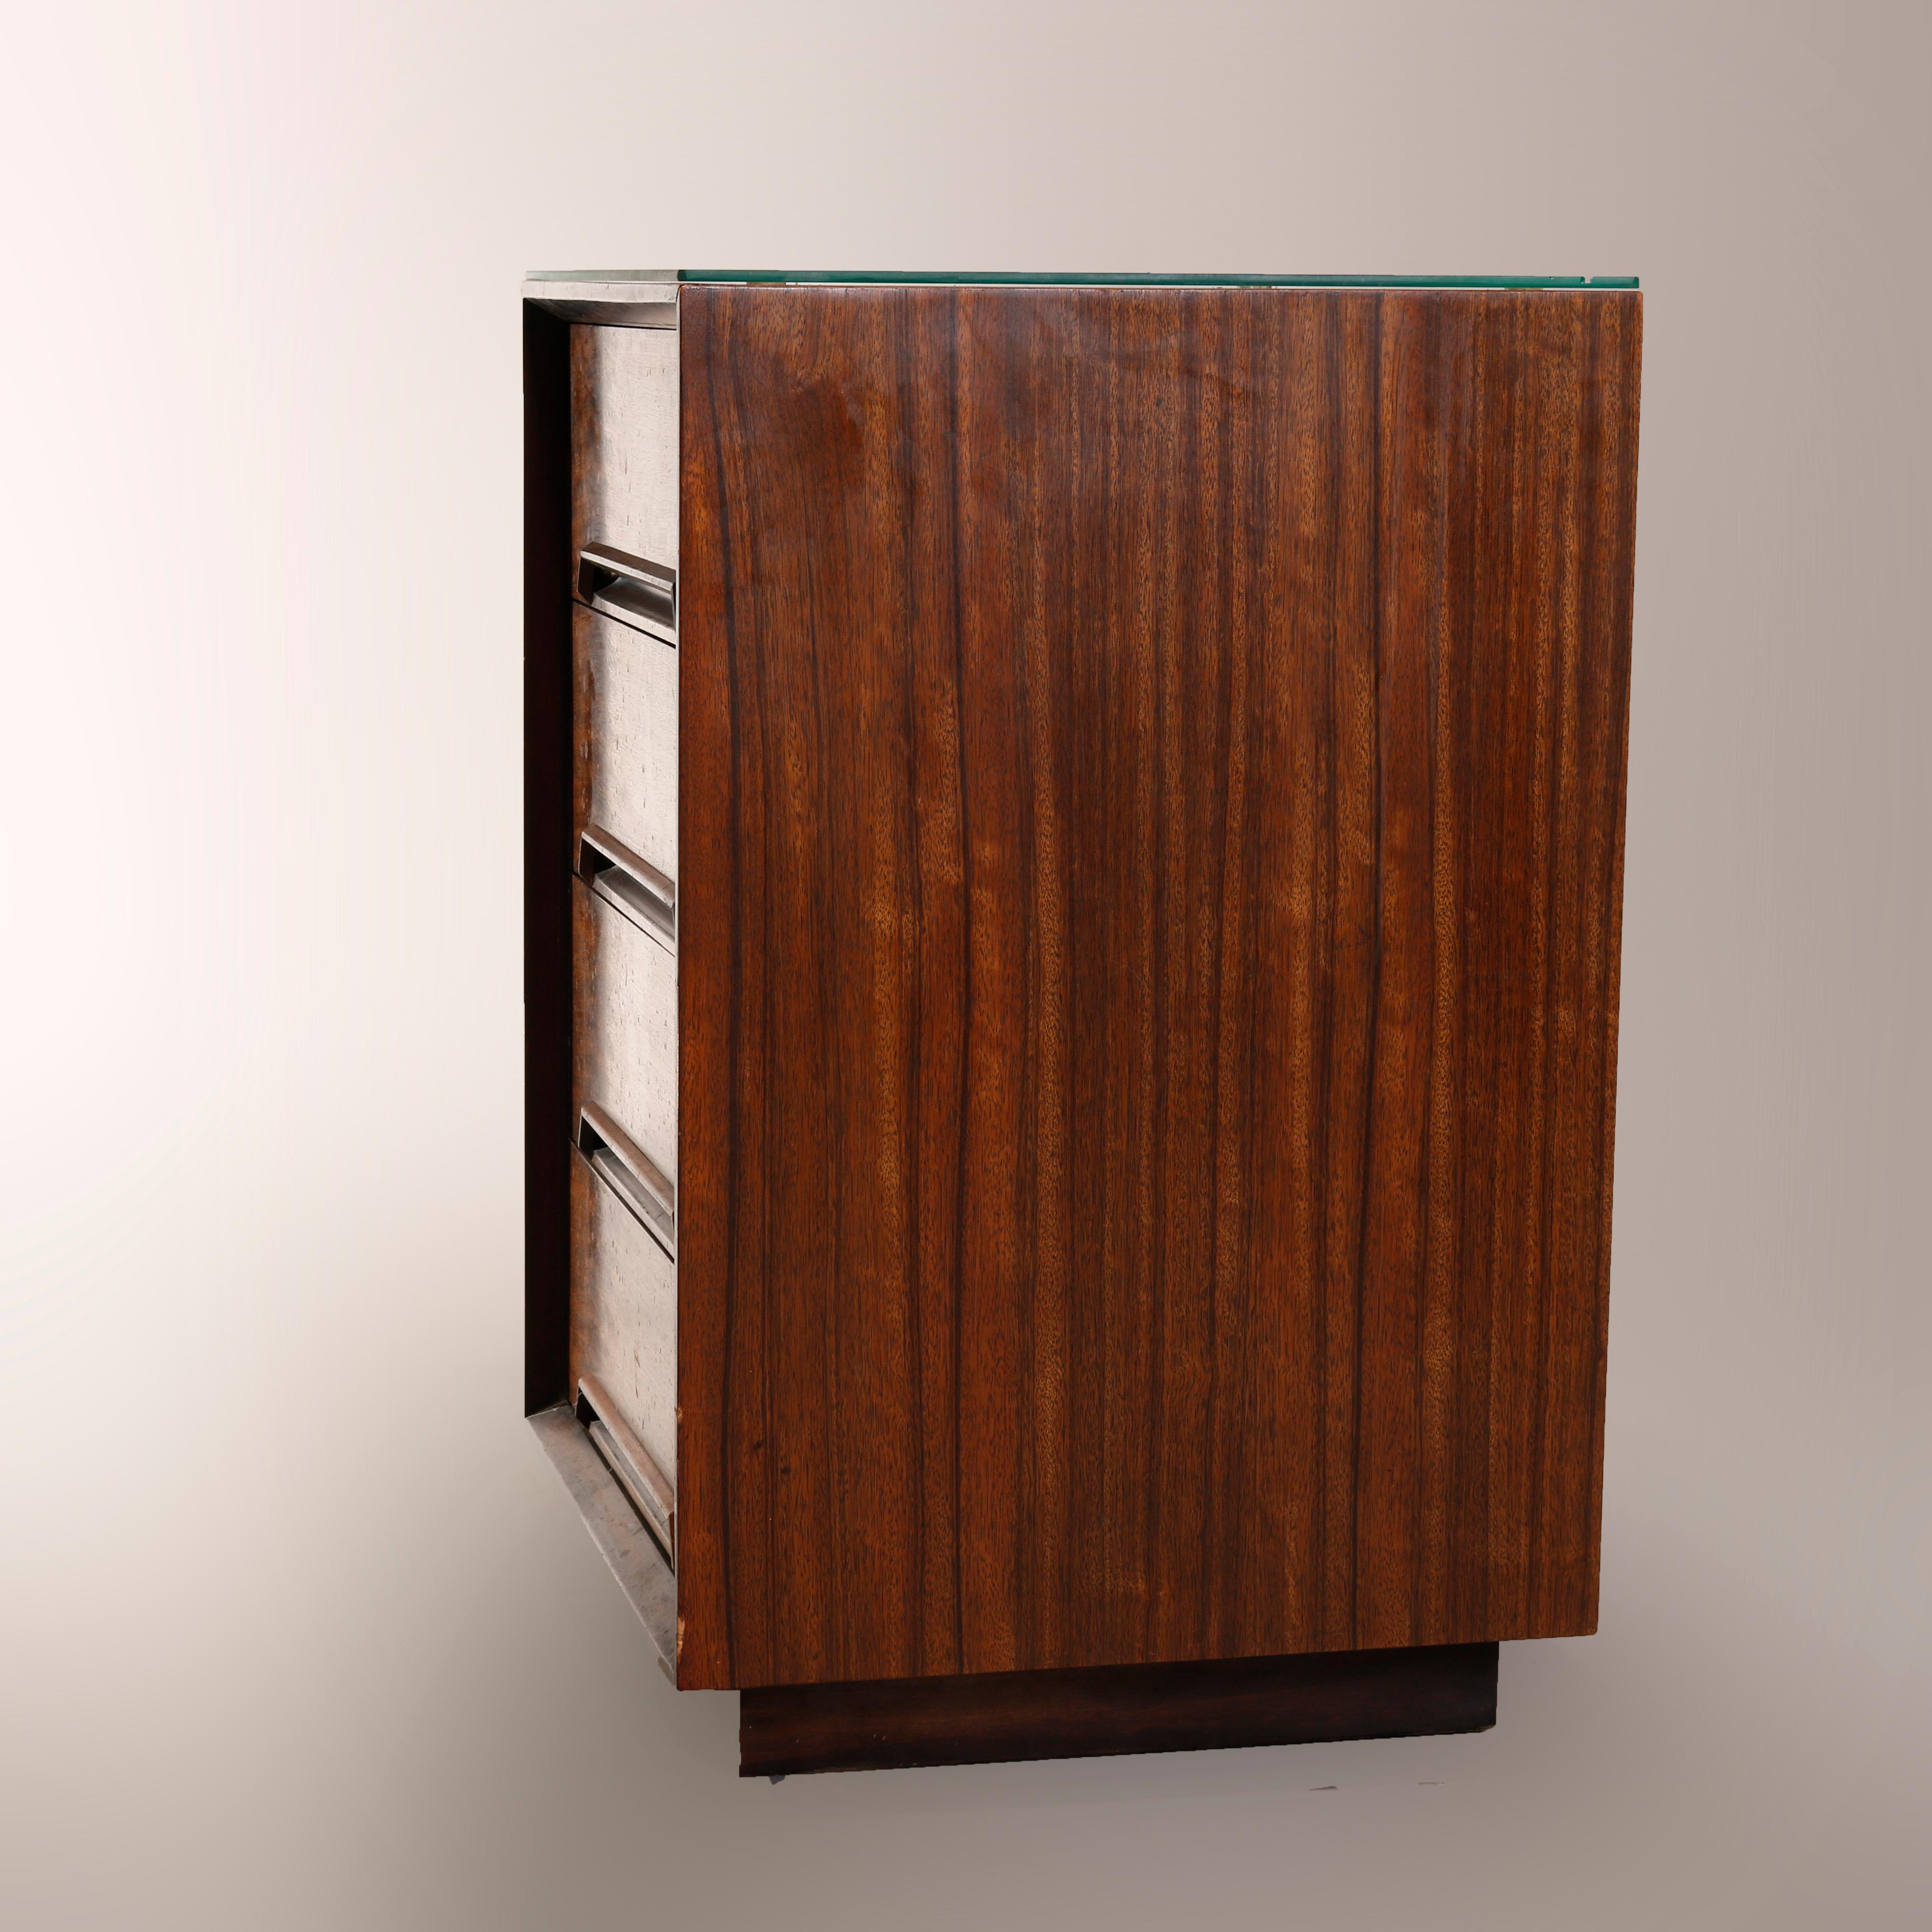 A Mid-Century Modern side cabinet by Drexel of the Perspective line offers walnut construction in tower form with three drawers, maker label on drawer interior as photographed, 20th century

Measures: 30.5